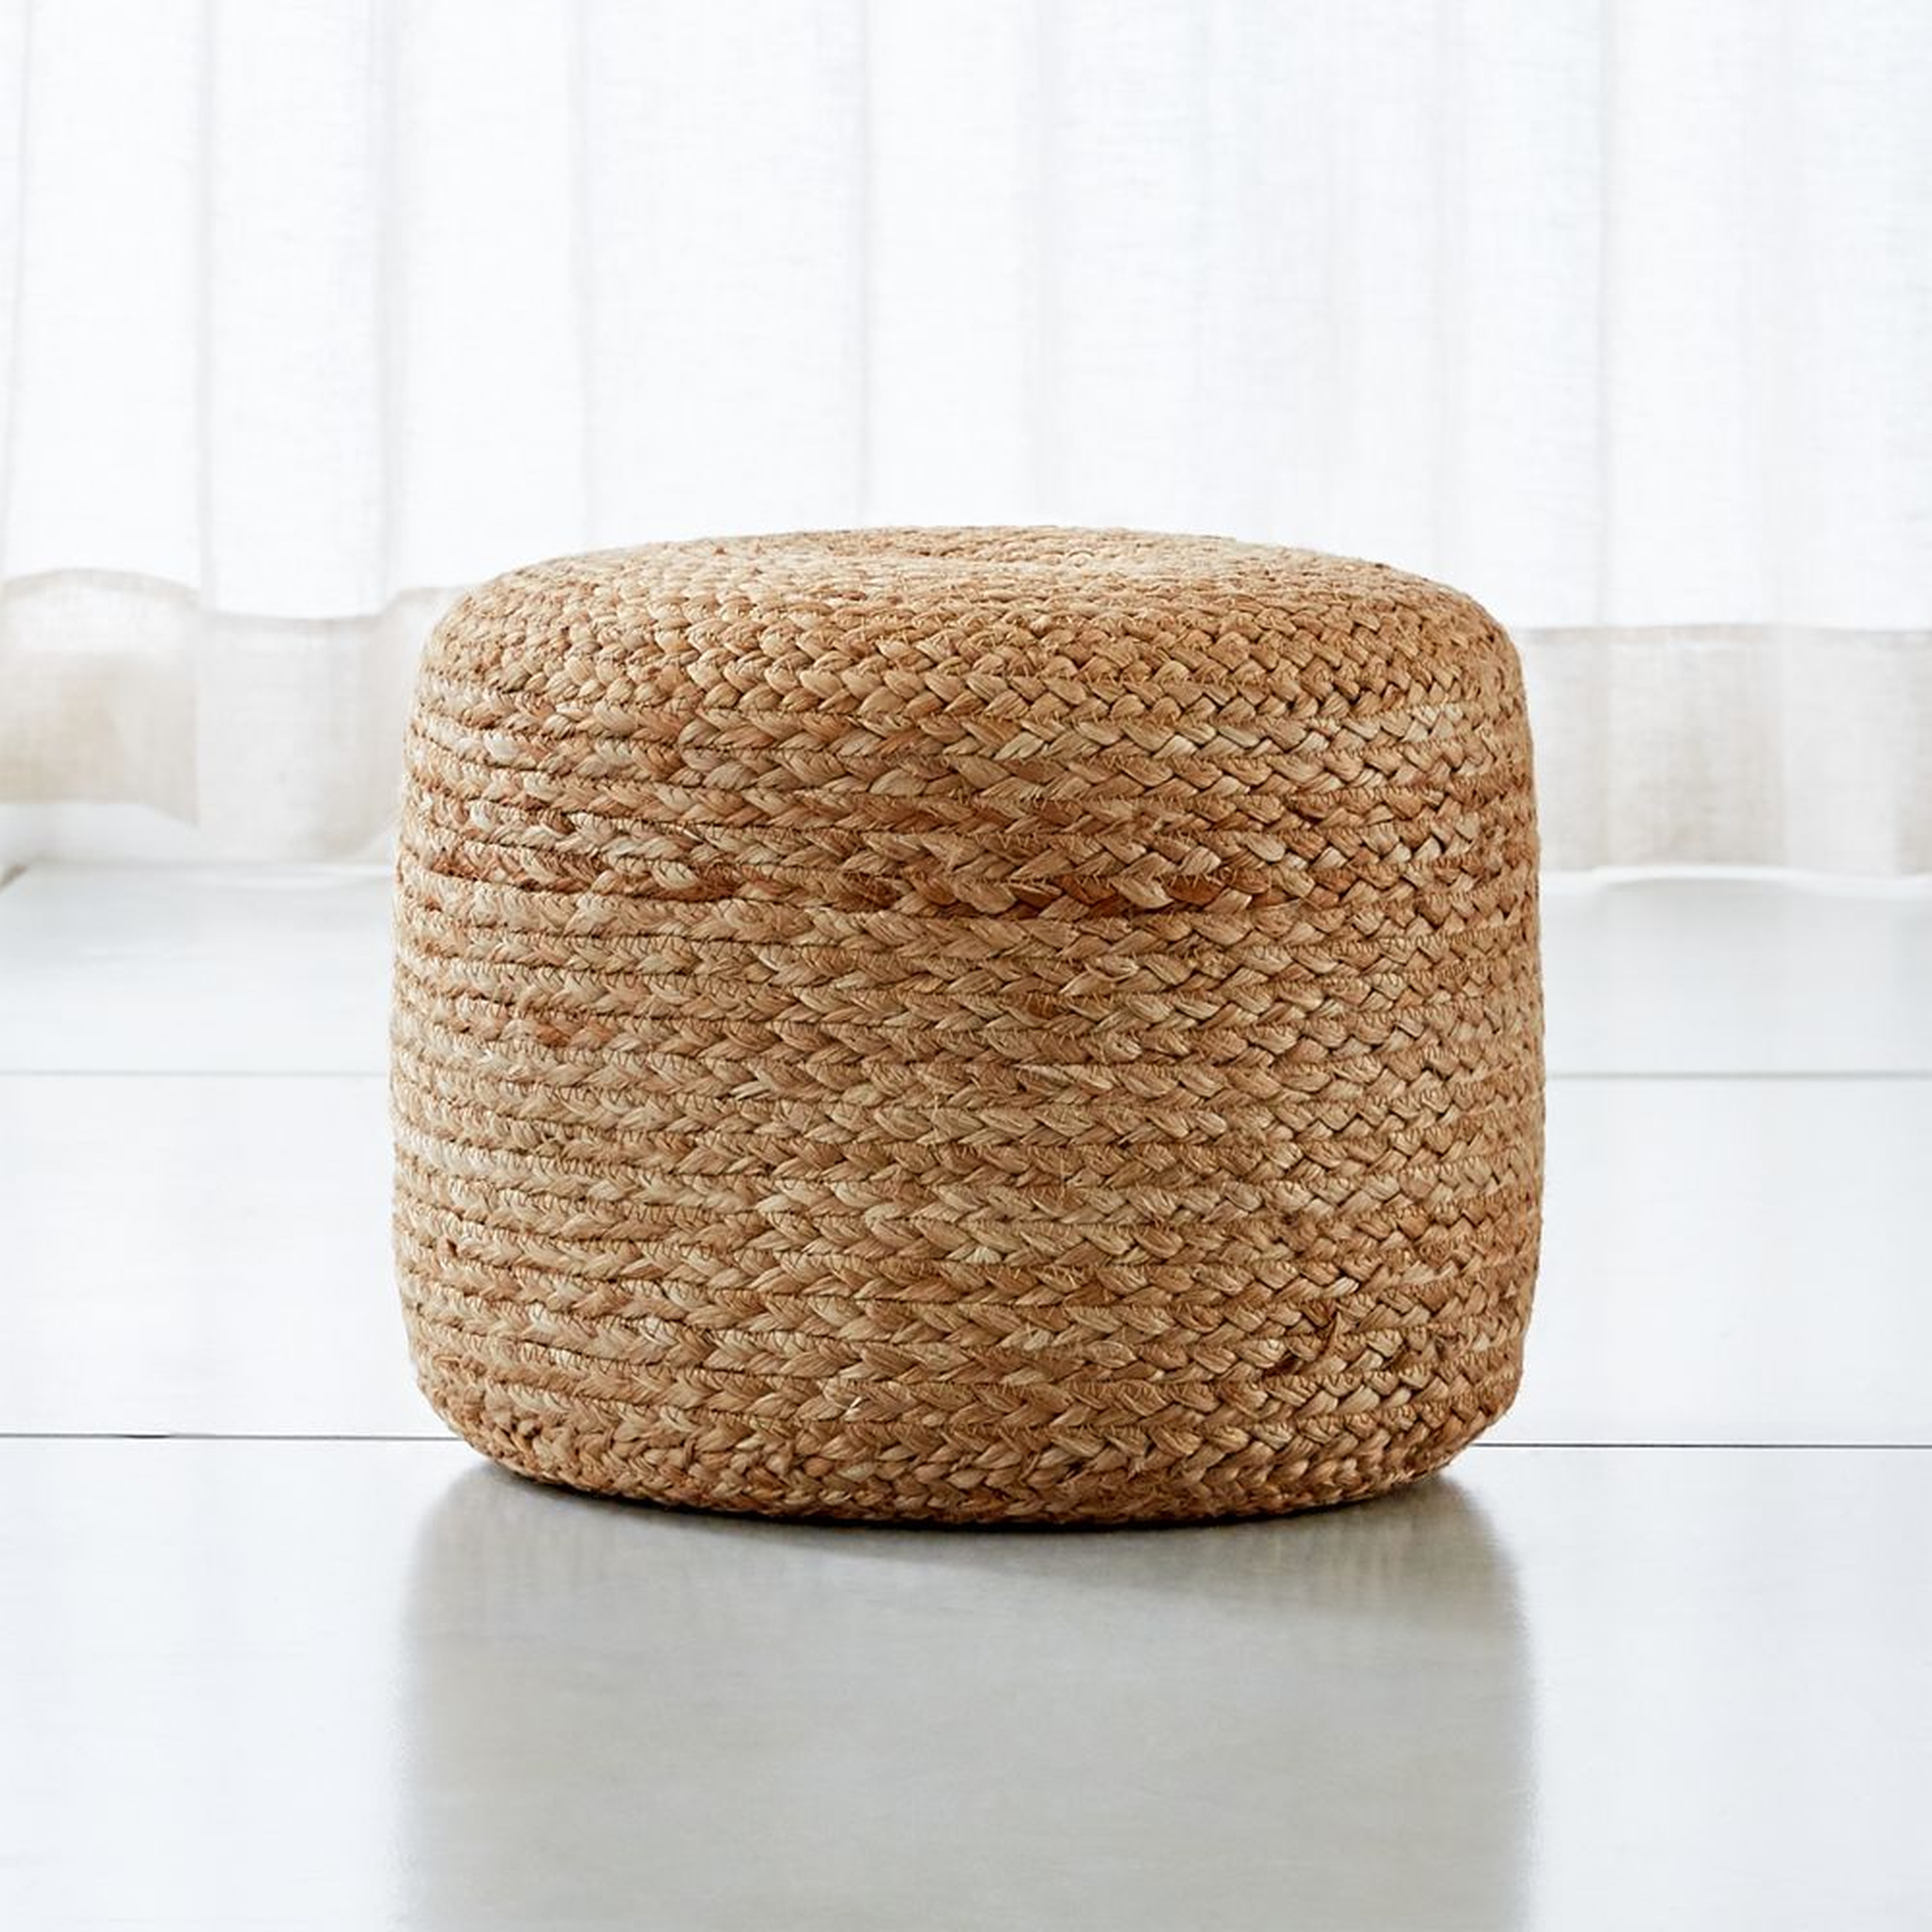 Alvaro Braided Jute Natural 16"x14" Pouf - NO LONGER AVAILABLE - Crate and Barrel